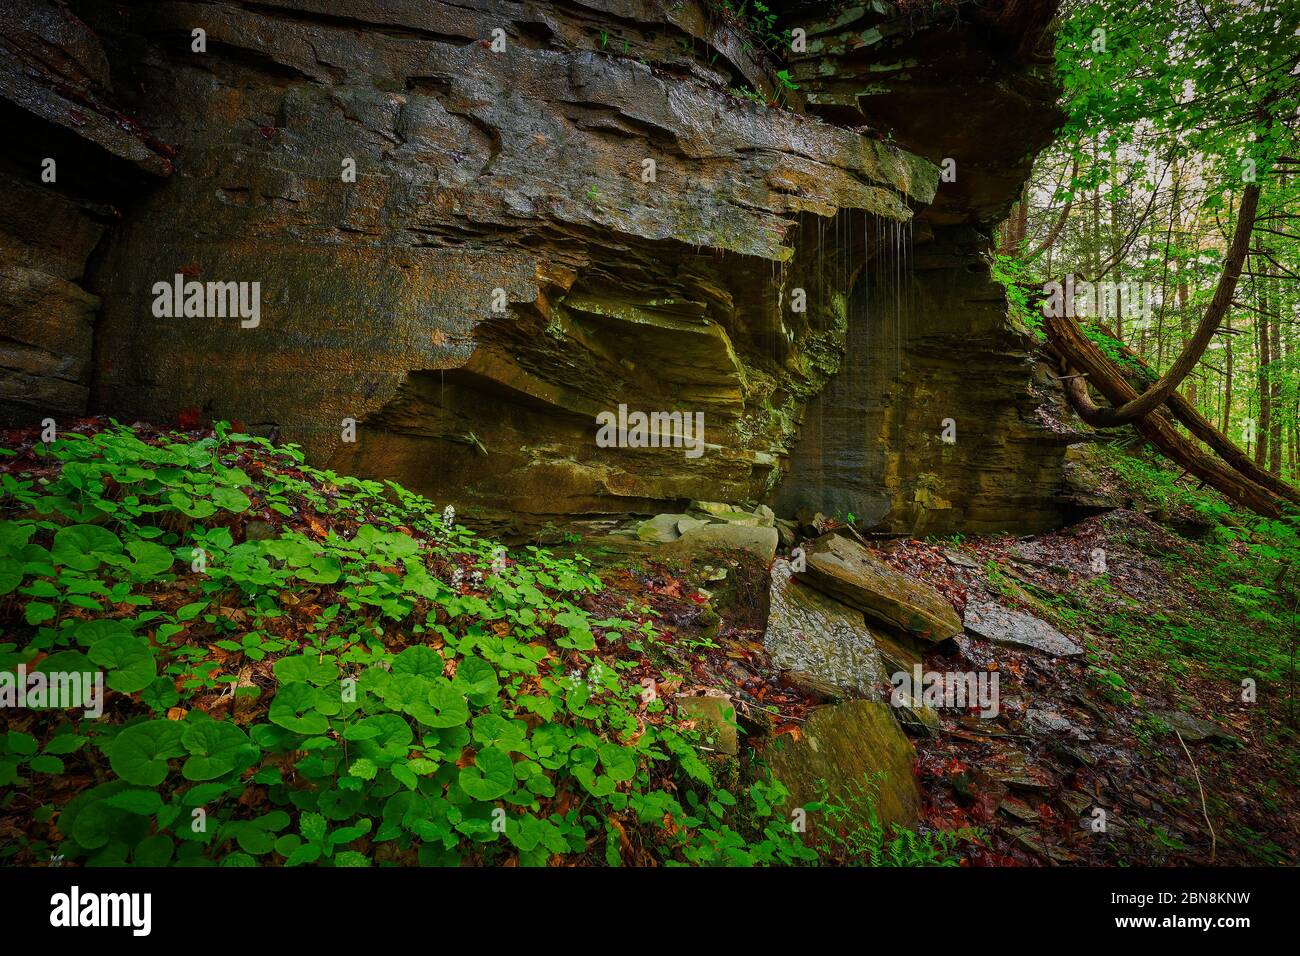 Small rock cliff with running water from a spring. Stock Photo